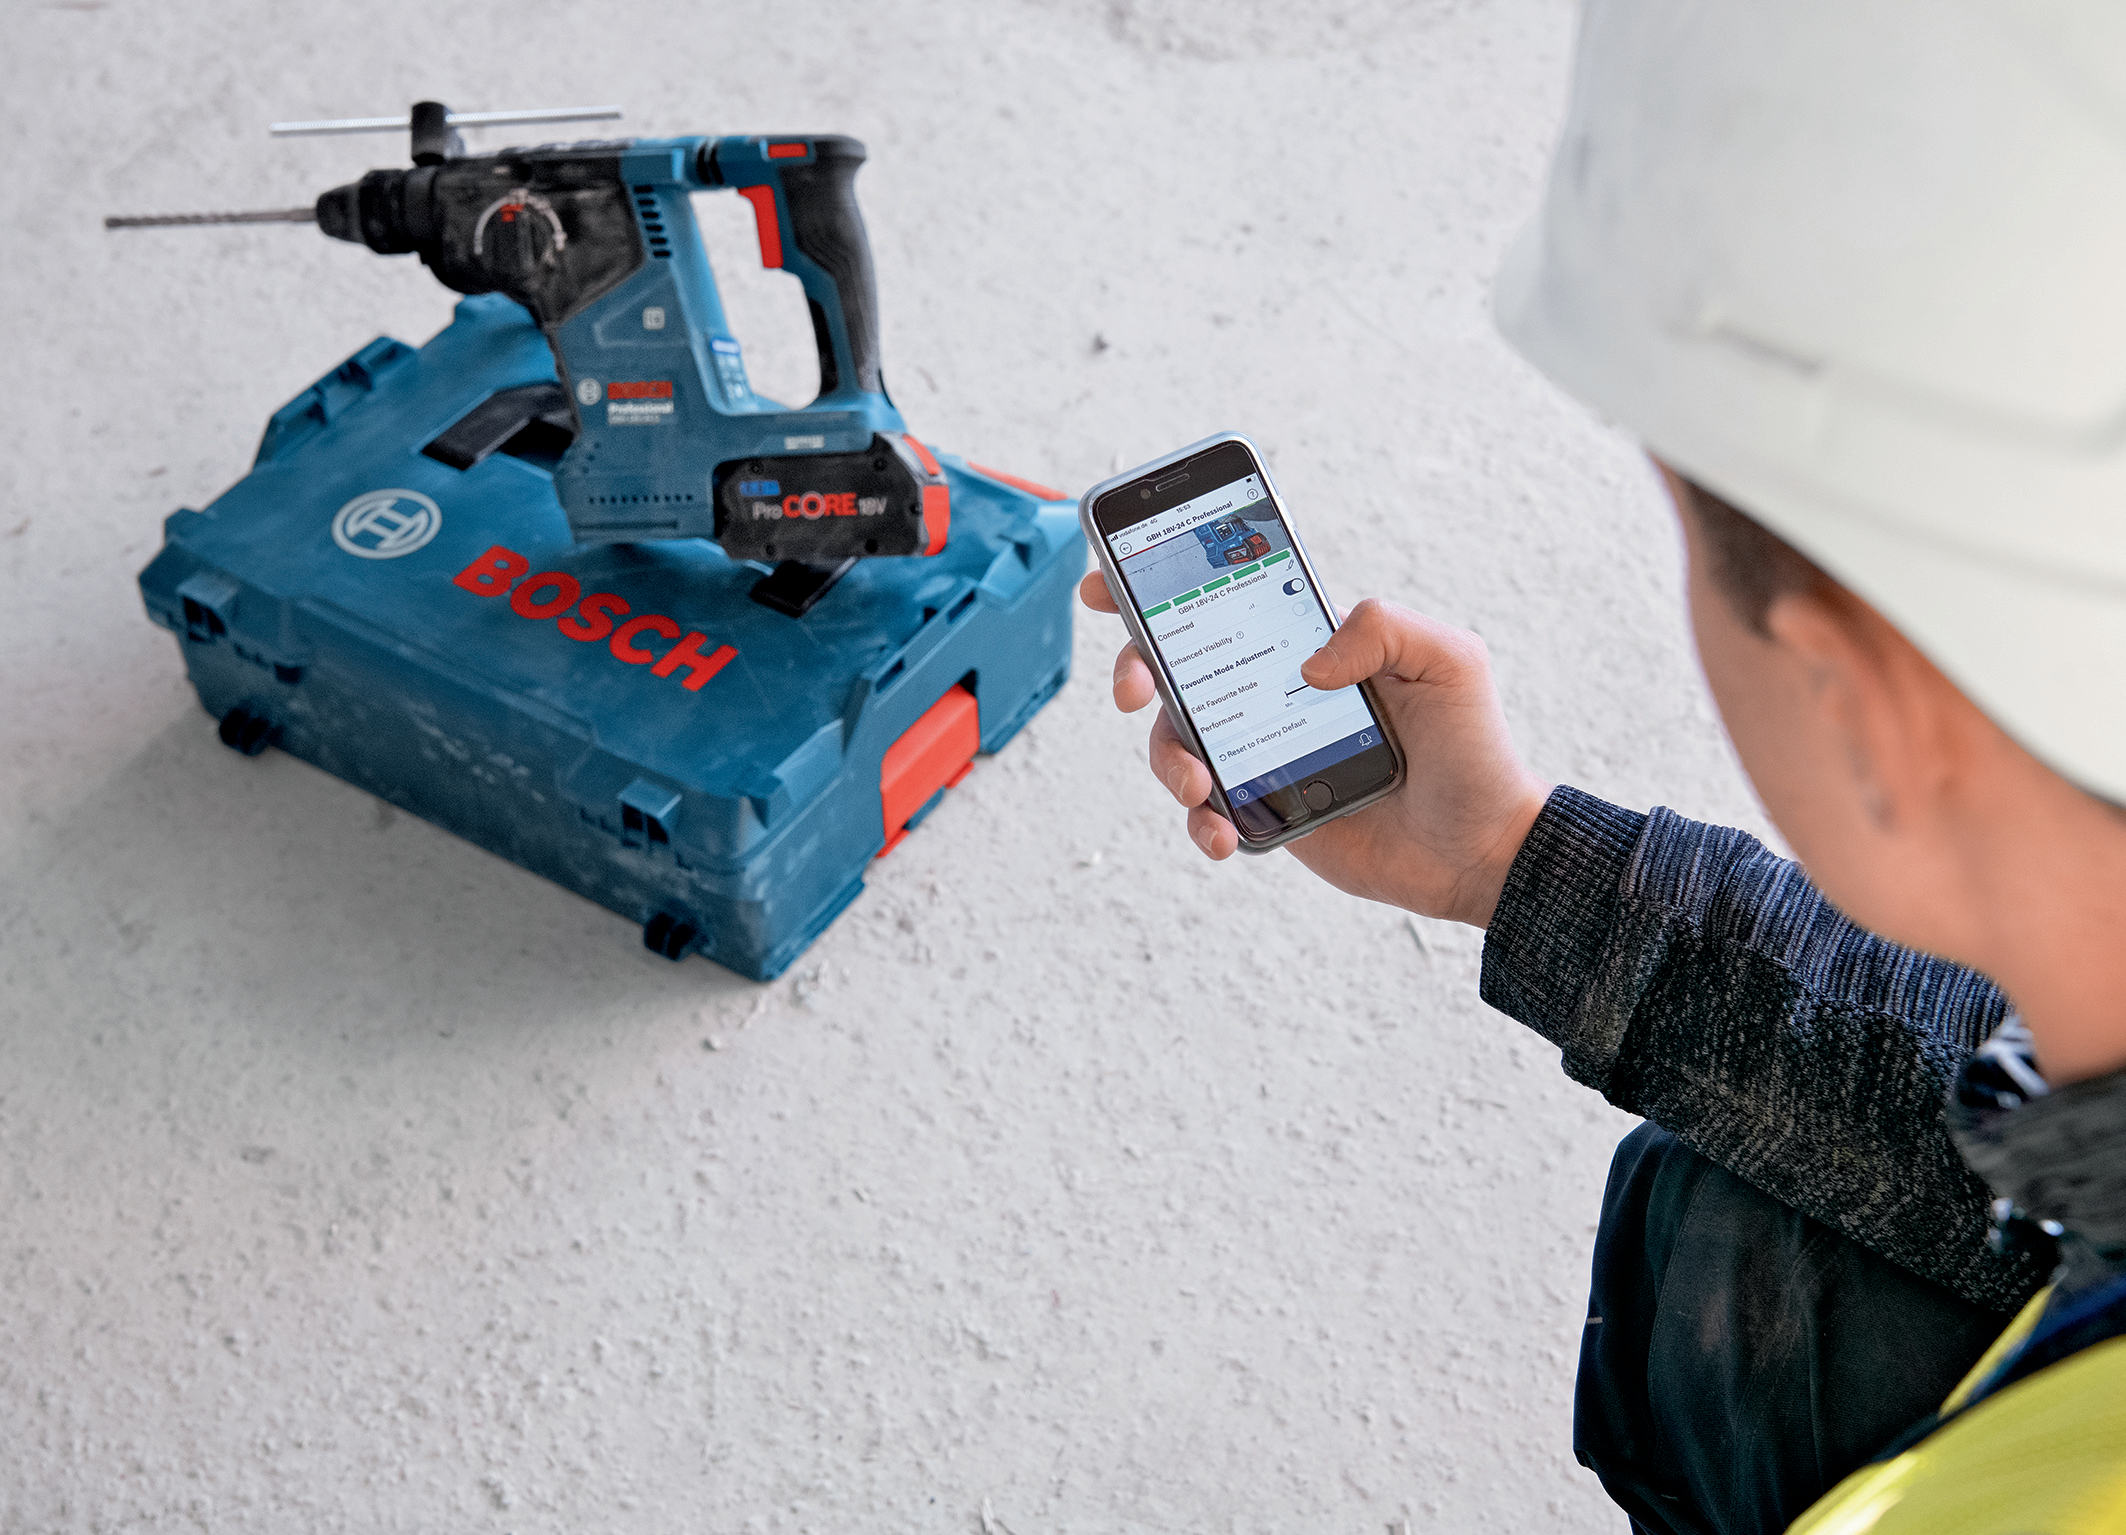 Optimal control thanks to user interface and customization via app: Versatile professional rotary hammers from Bosch